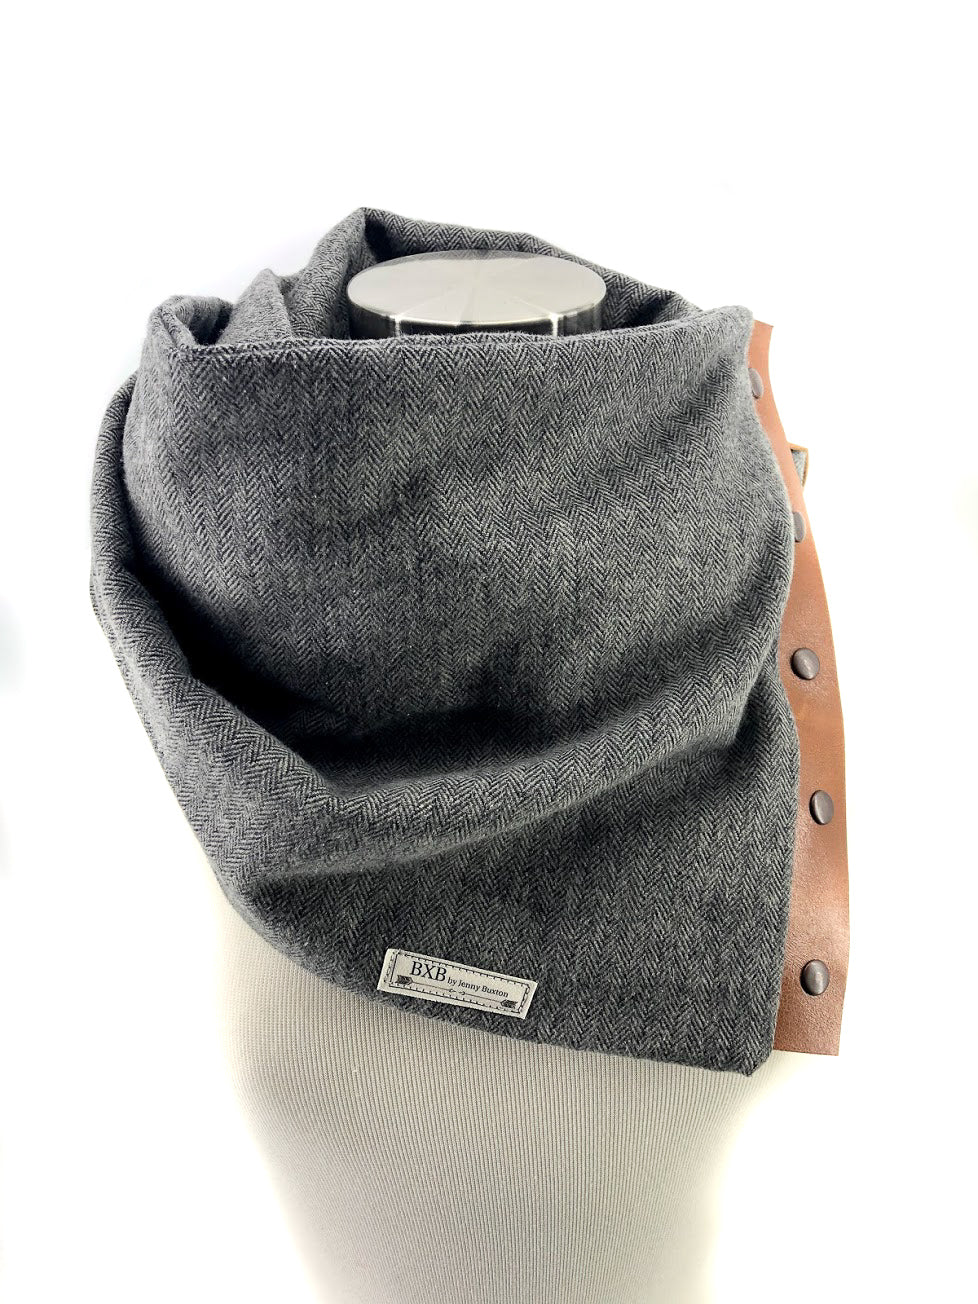 Black & Gray Herringbone Multi Snap Scarf with Leather Snaps